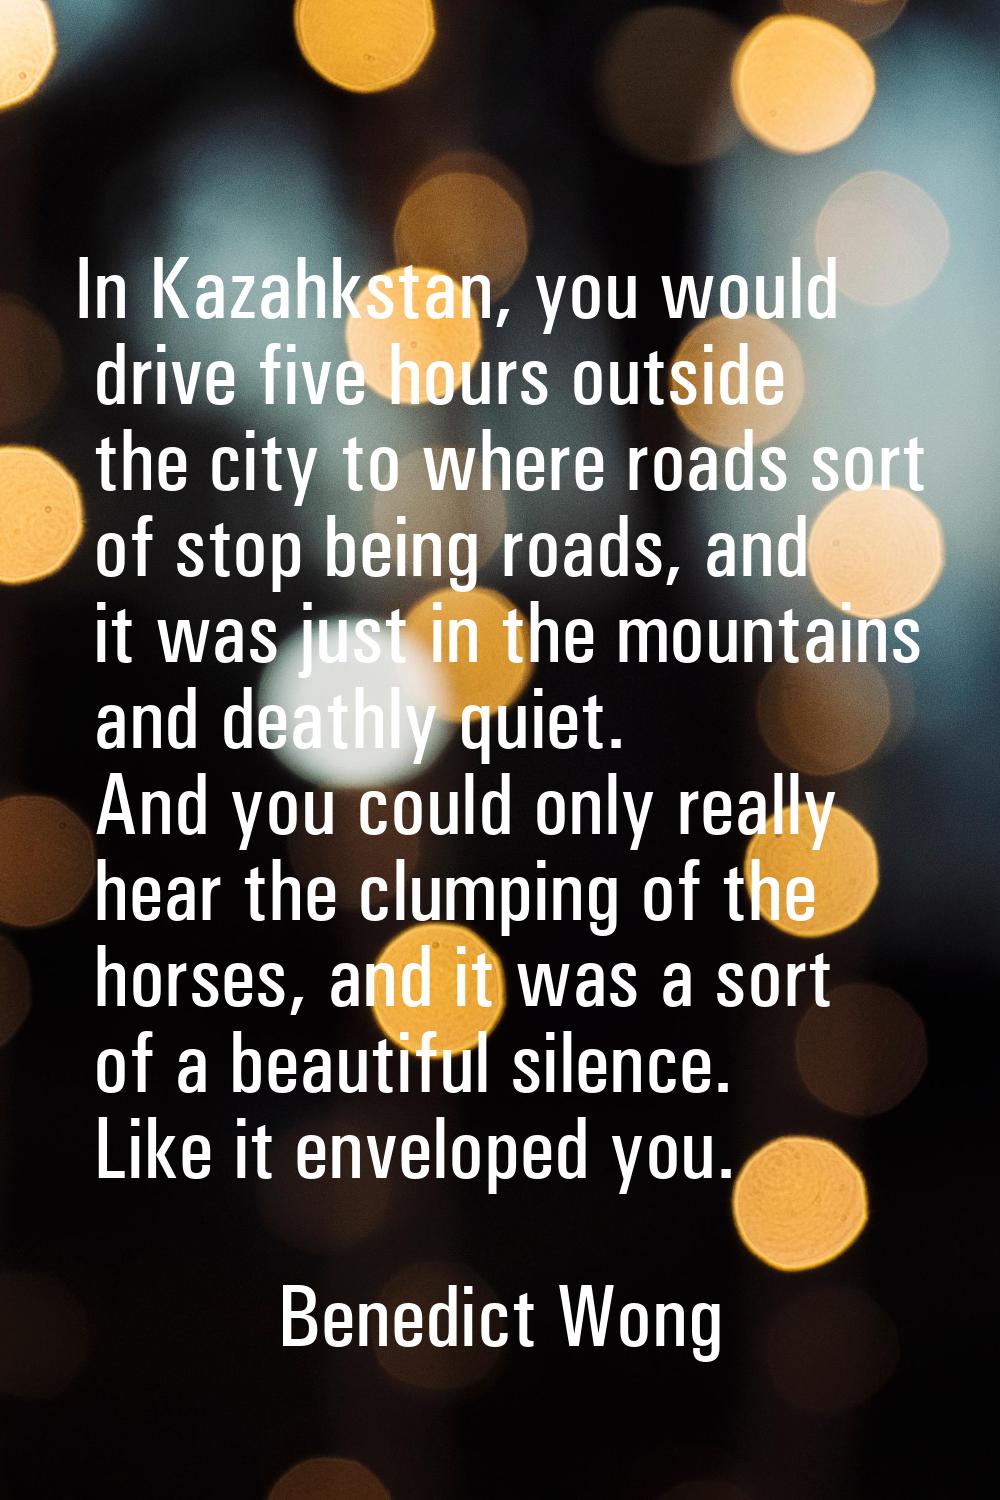 In Kazahkstan, you would drive five hours outside the city to where roads sort of stop being roads,